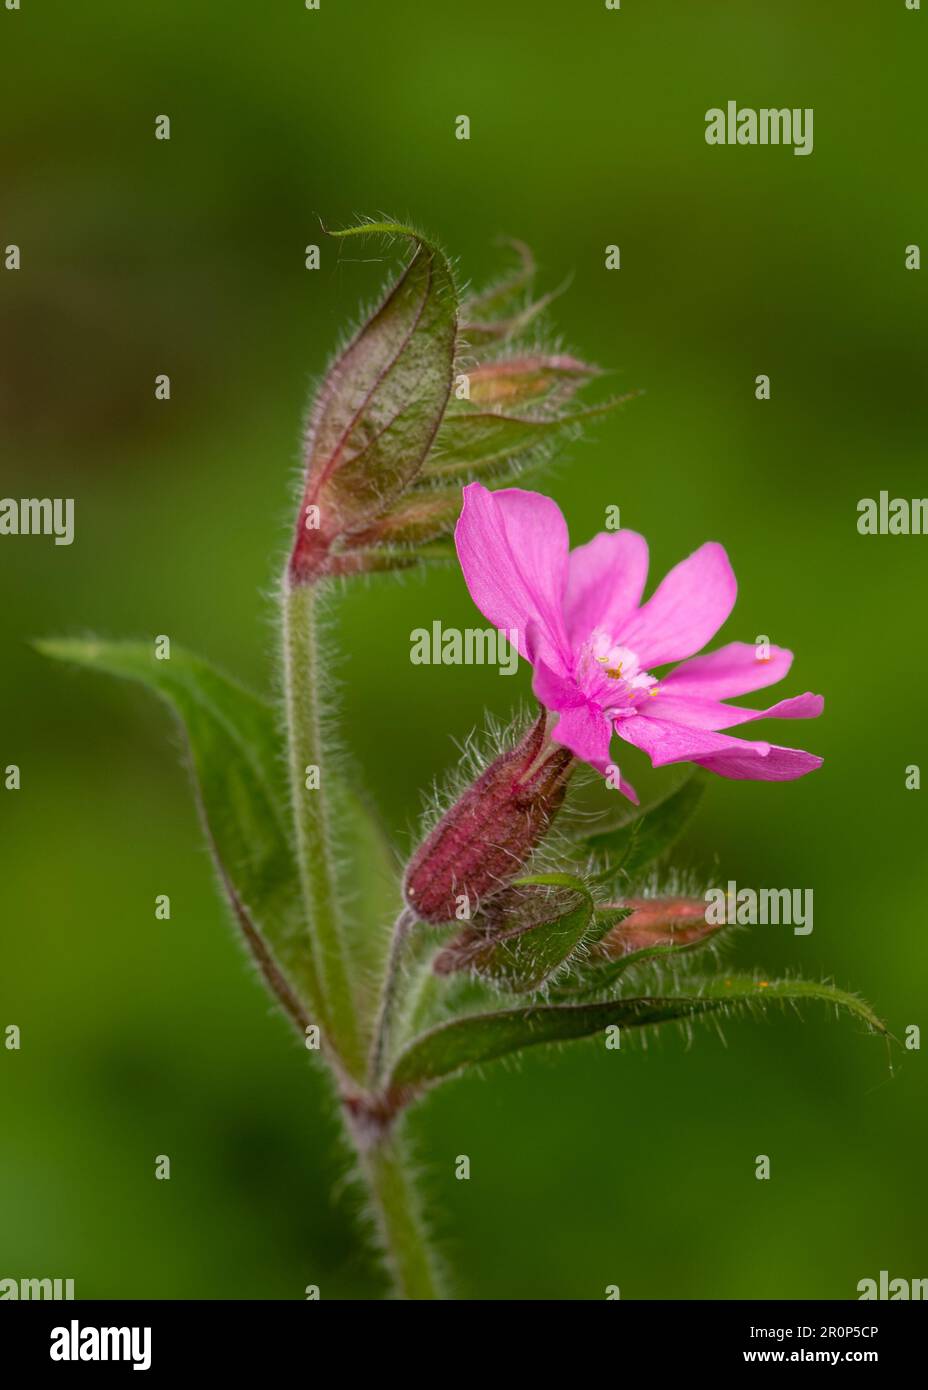 n Full Bloom: The Striking Red Campion Stock Photo